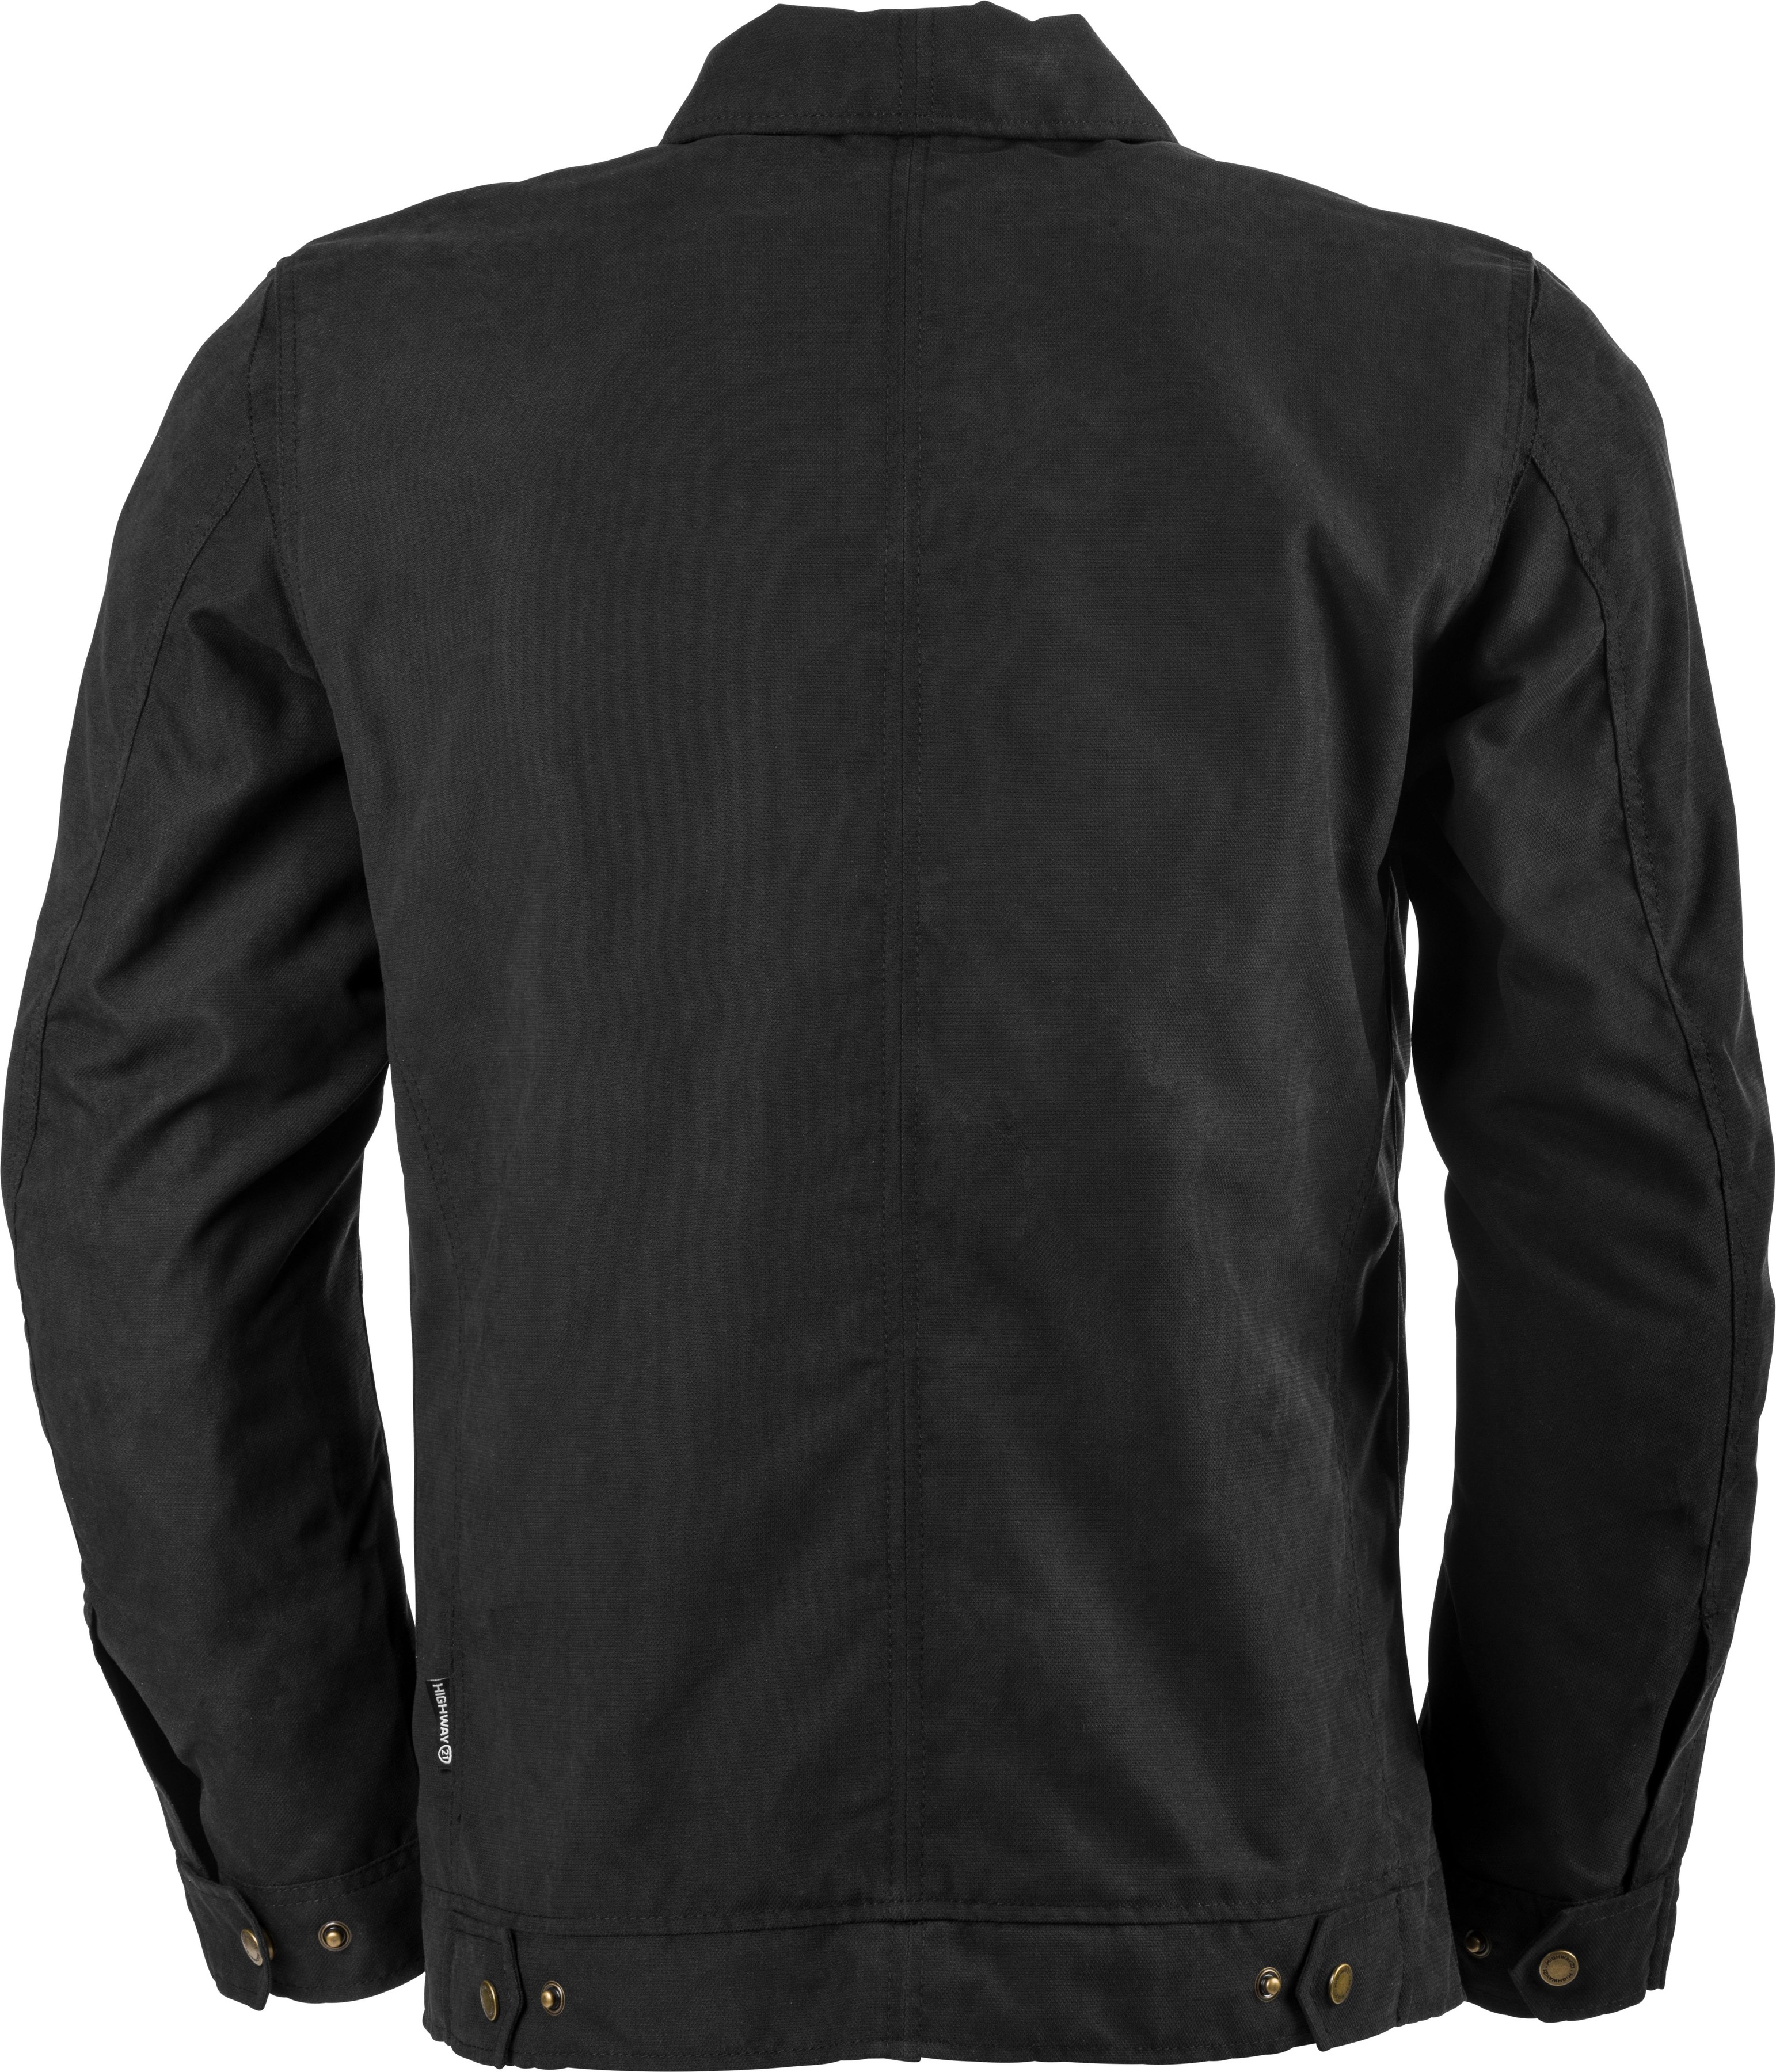 Winchester Riding Jacket Black 4X-Large - Click Image to Close